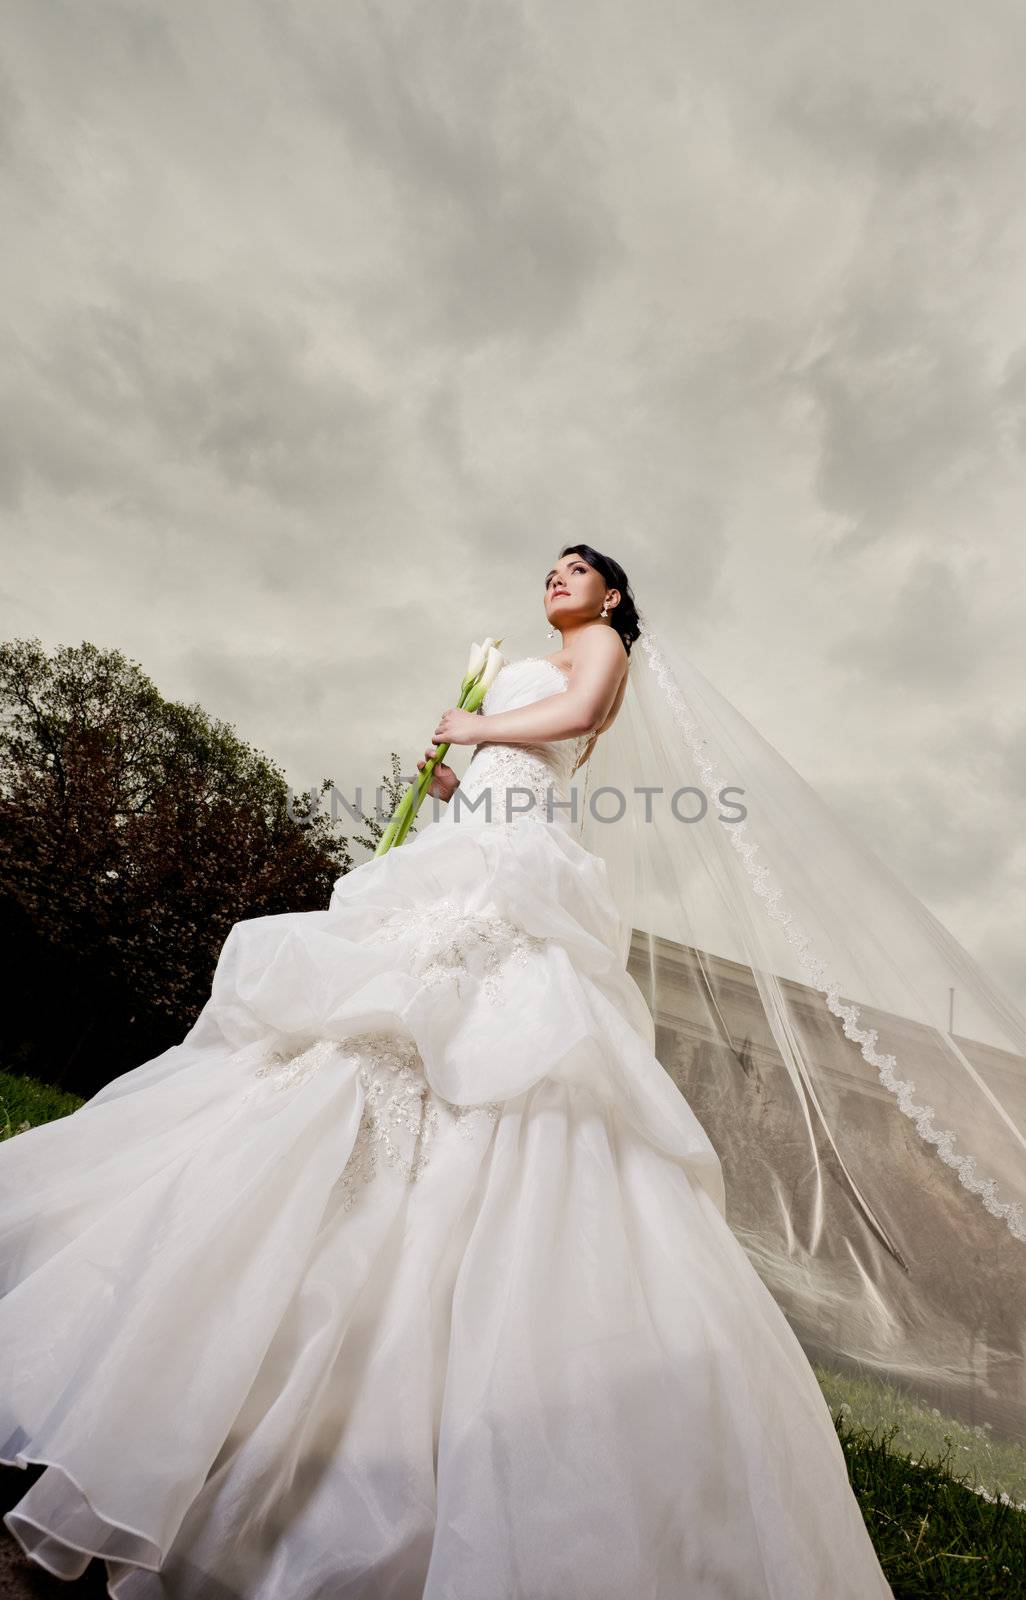 Bride with long veil standing outdoors, cloudy sky behind